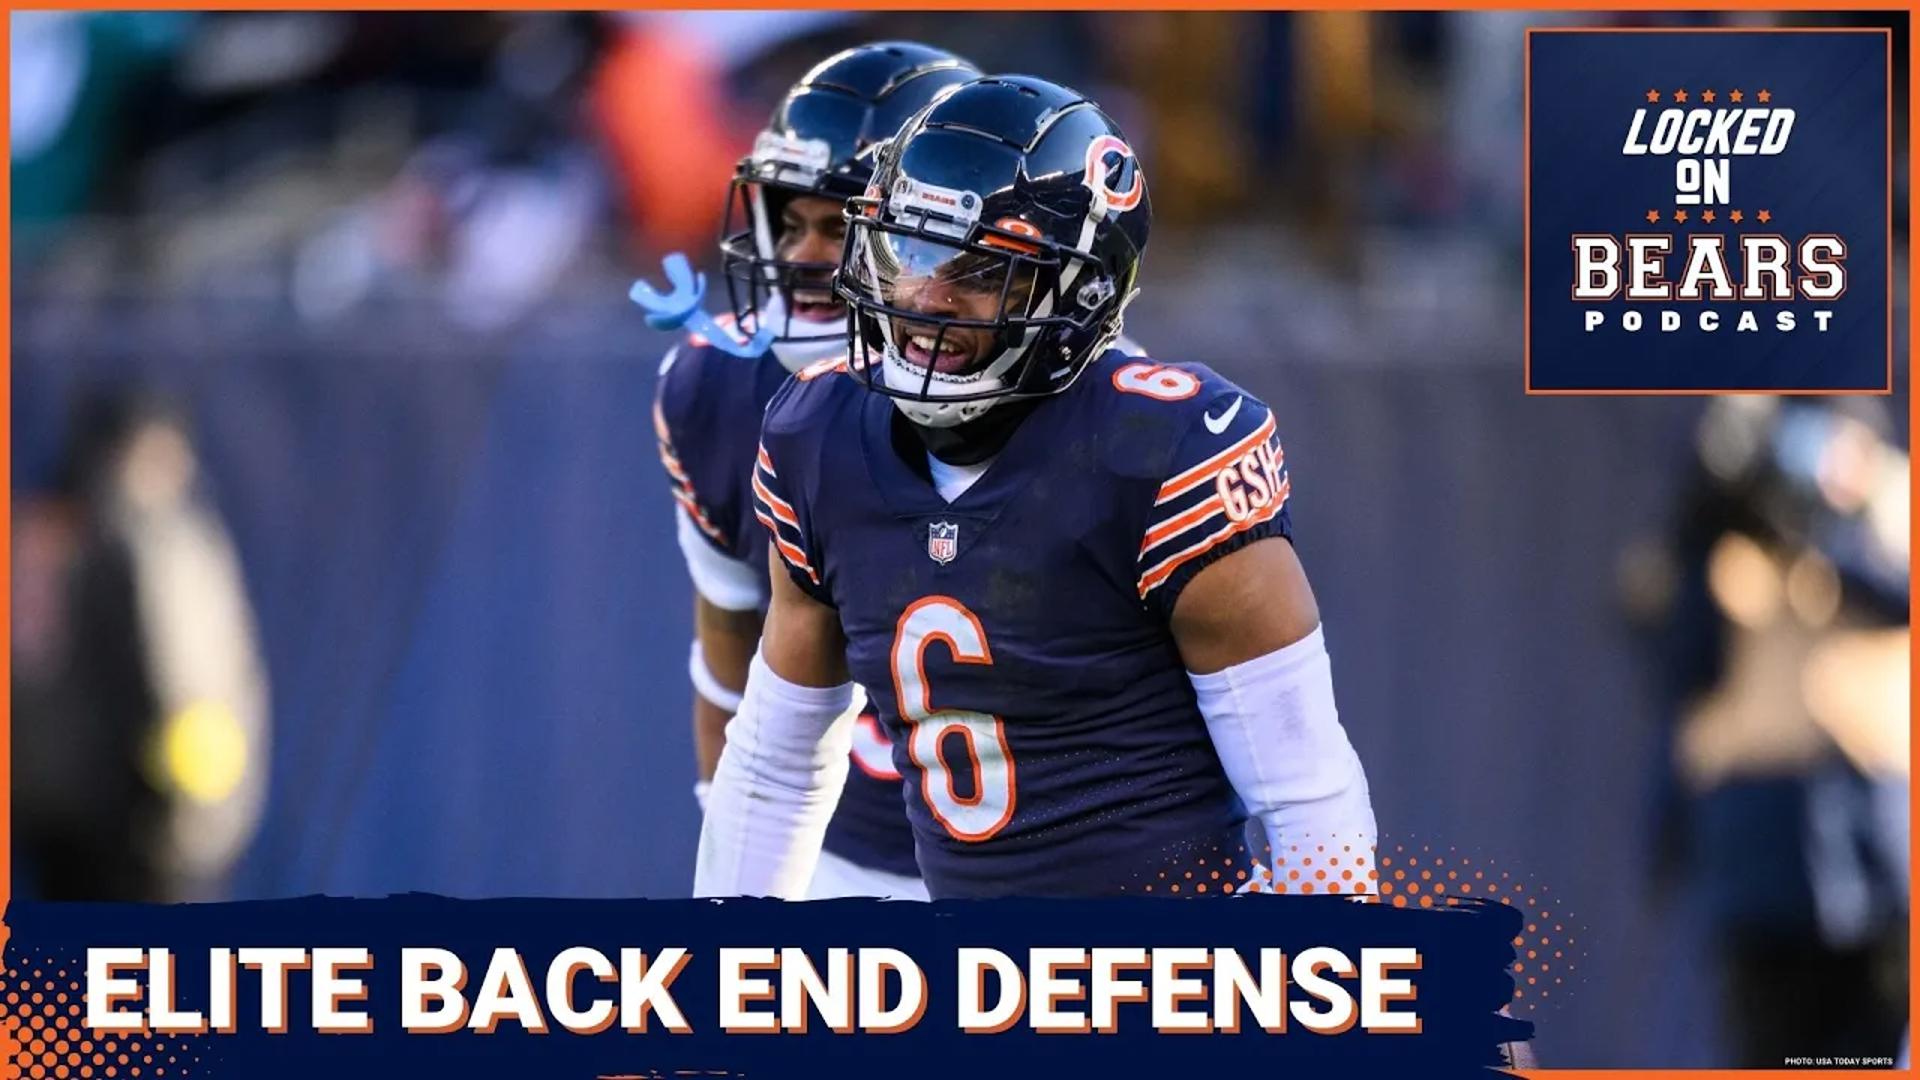 Chicago Bears defensive coordinator Eric Washington says his defense's back seven are as good as any group in the NFL